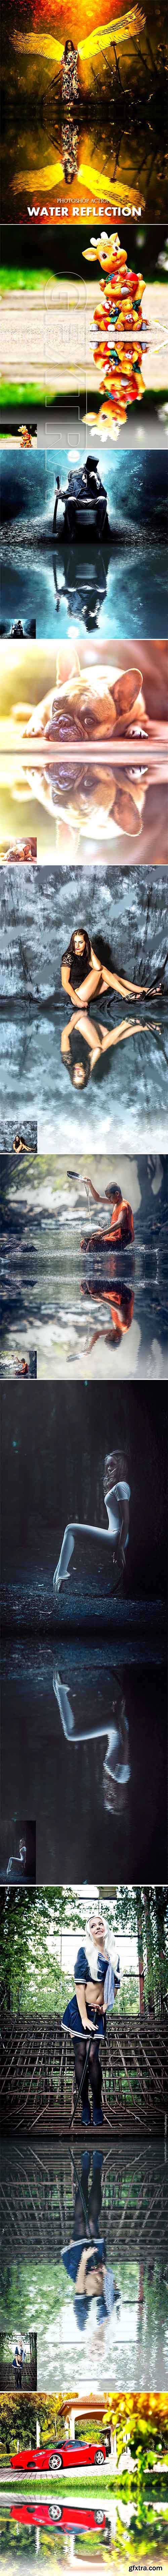 GraphicRiver - Water Reflection Photoshop Action